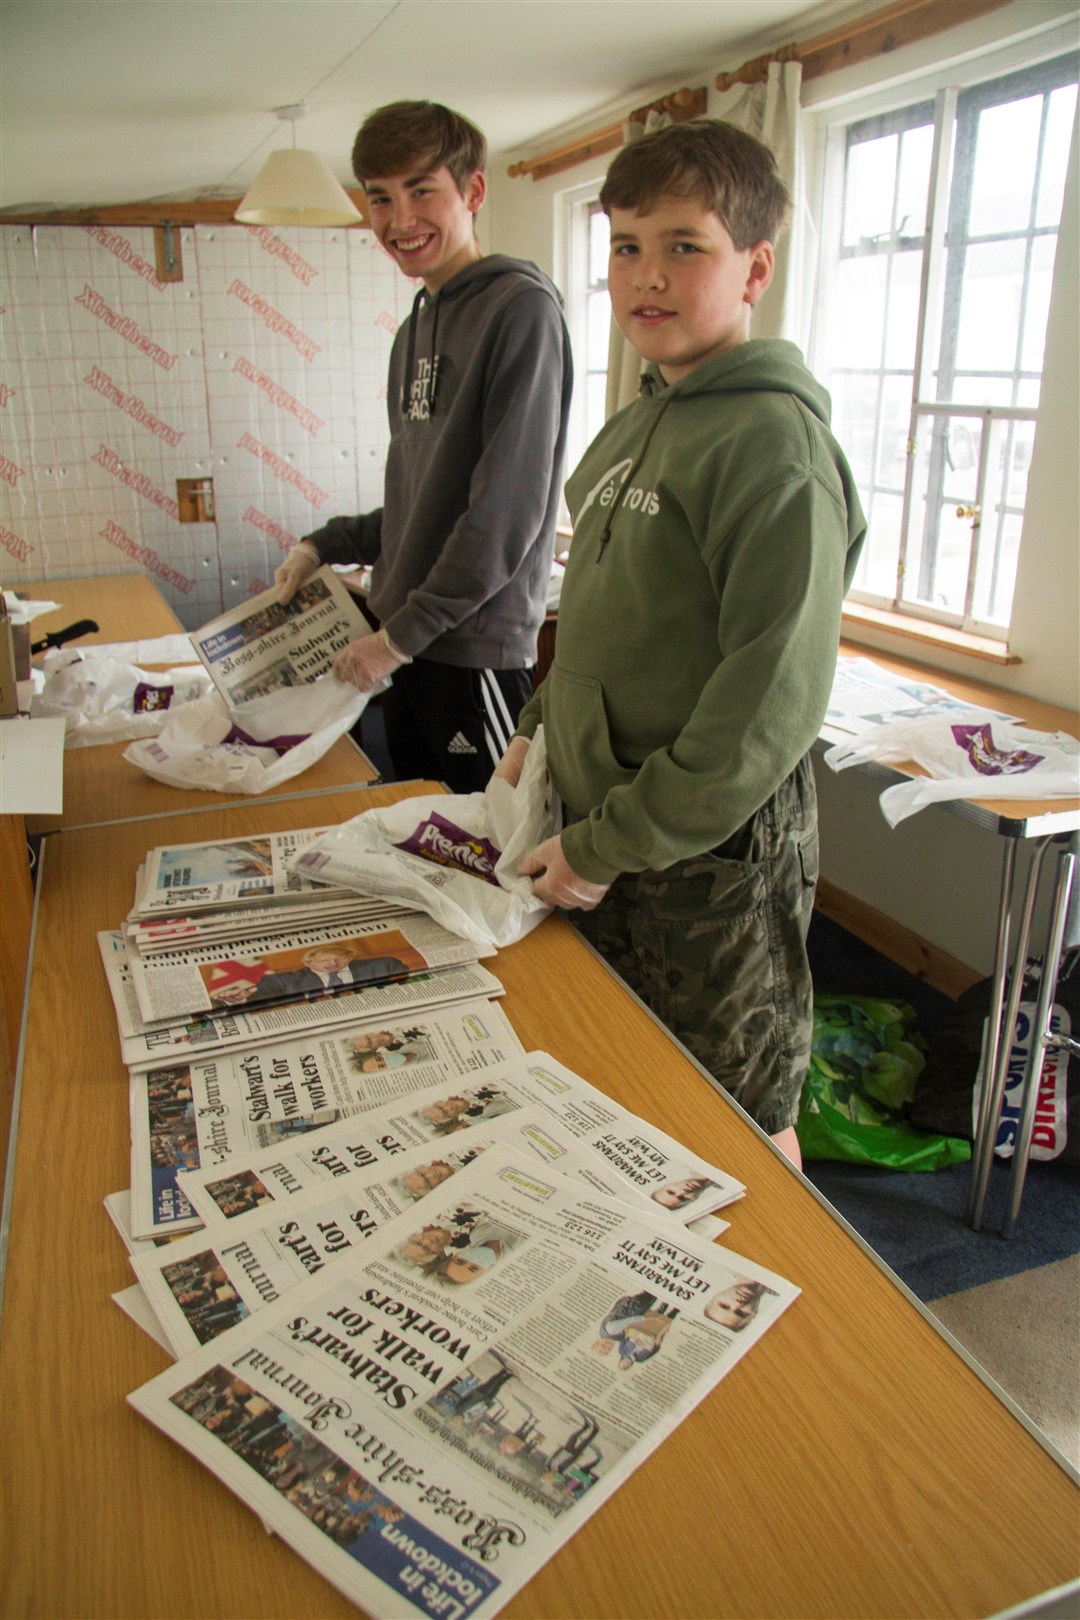 Volunteers in Cromarty stepped up to the challenge quickly. Young people joined the effort to ensure newspapers got delivered to vulernerable householders, thus also reducing the number of people visiting local shops at the height of the pandemic.